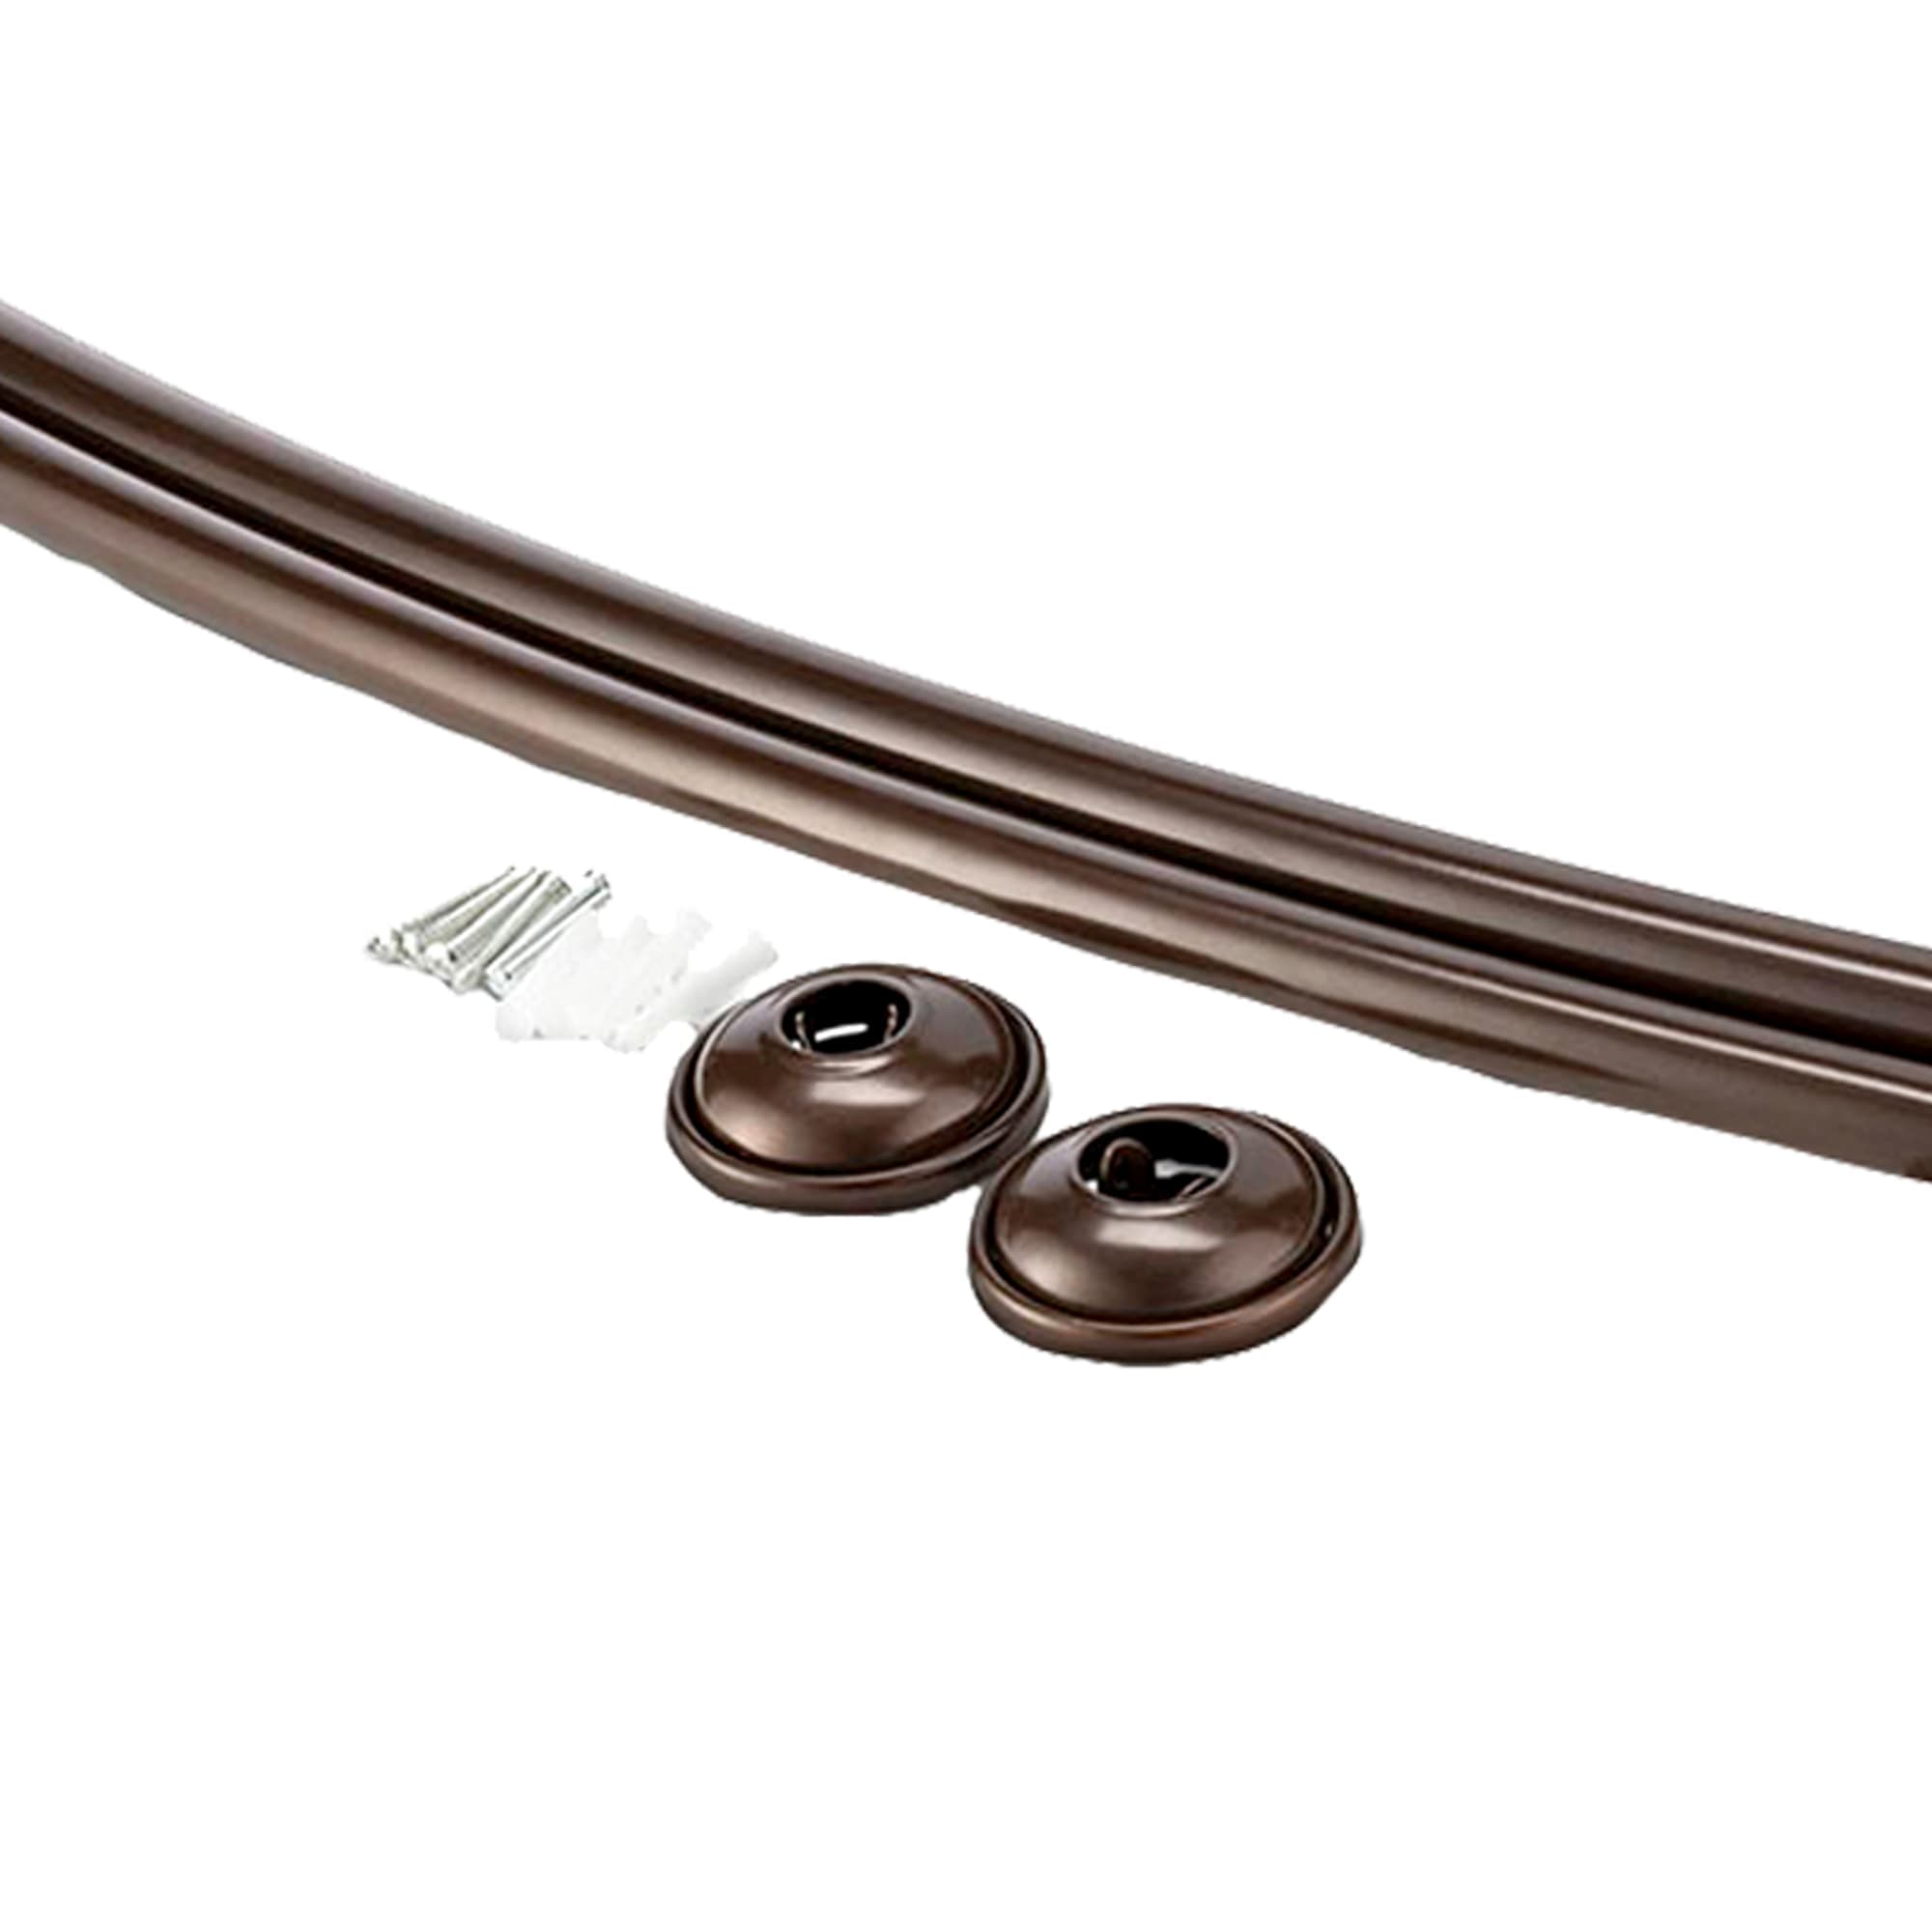 Home Basics Steel Curved Shower Rod, Bronze $15.00 EACH, CASE PACK OF 8